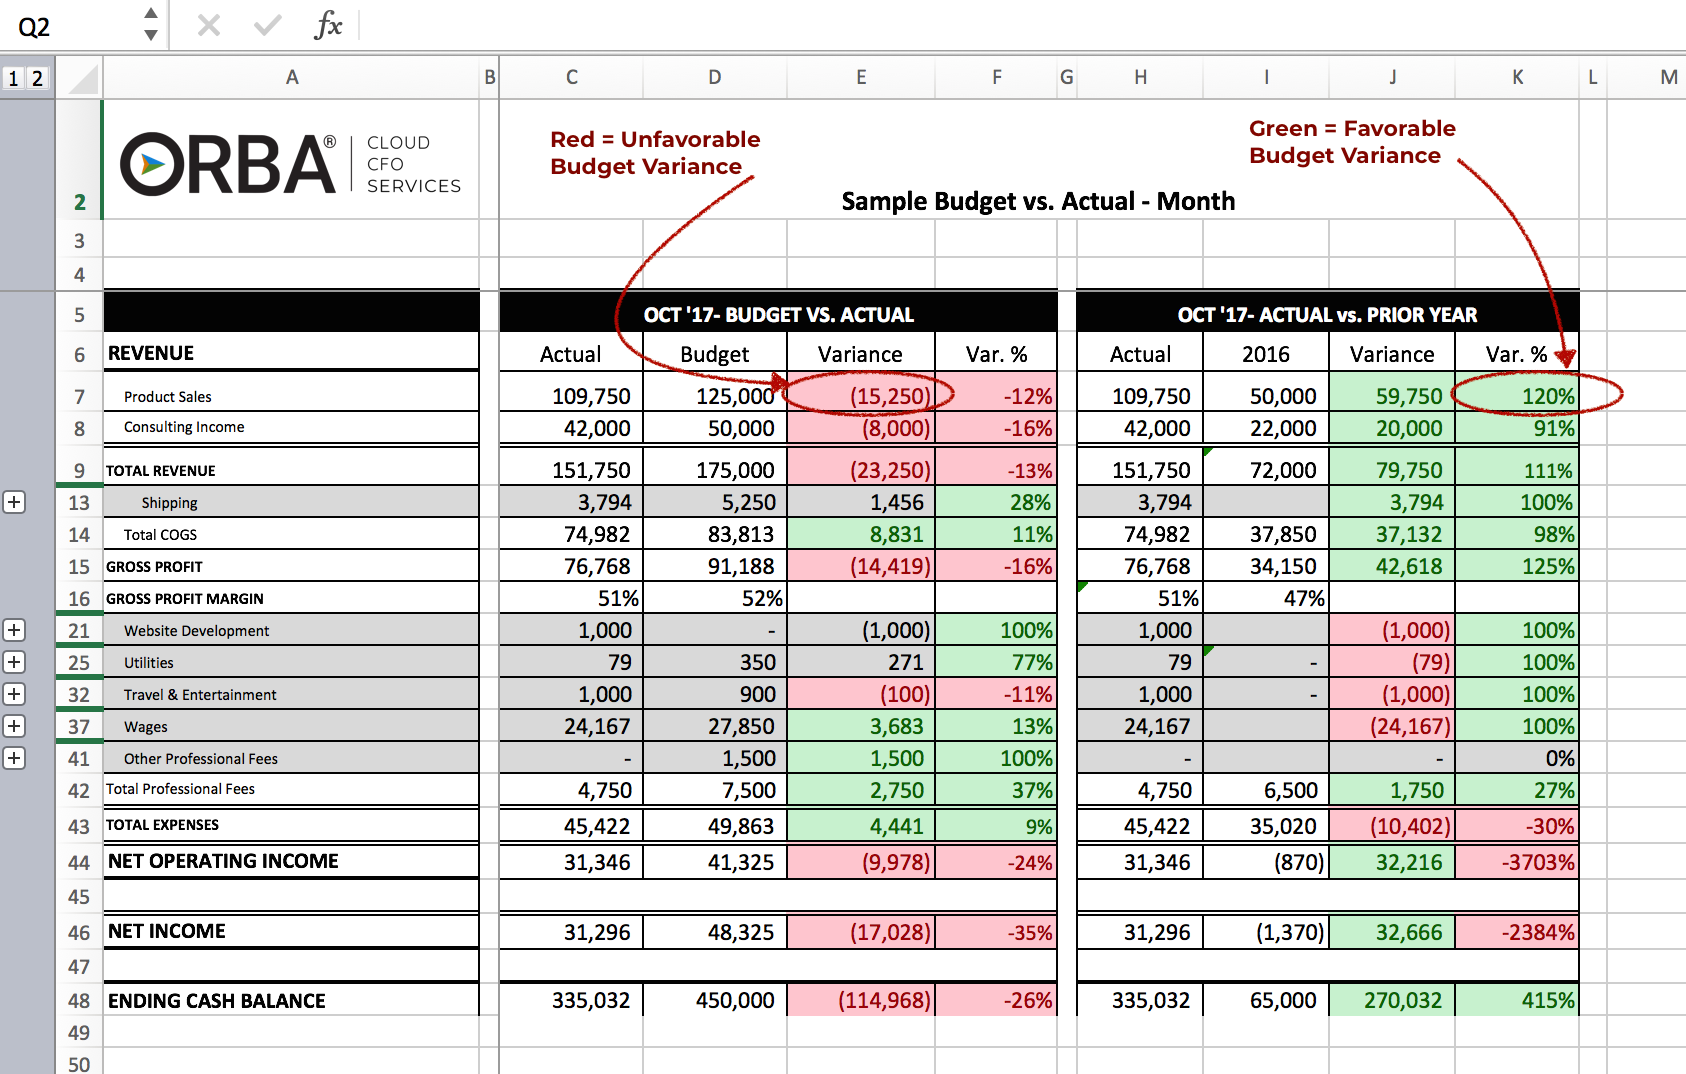 Sample Budget vs Actual Month to Examine Budget Variances